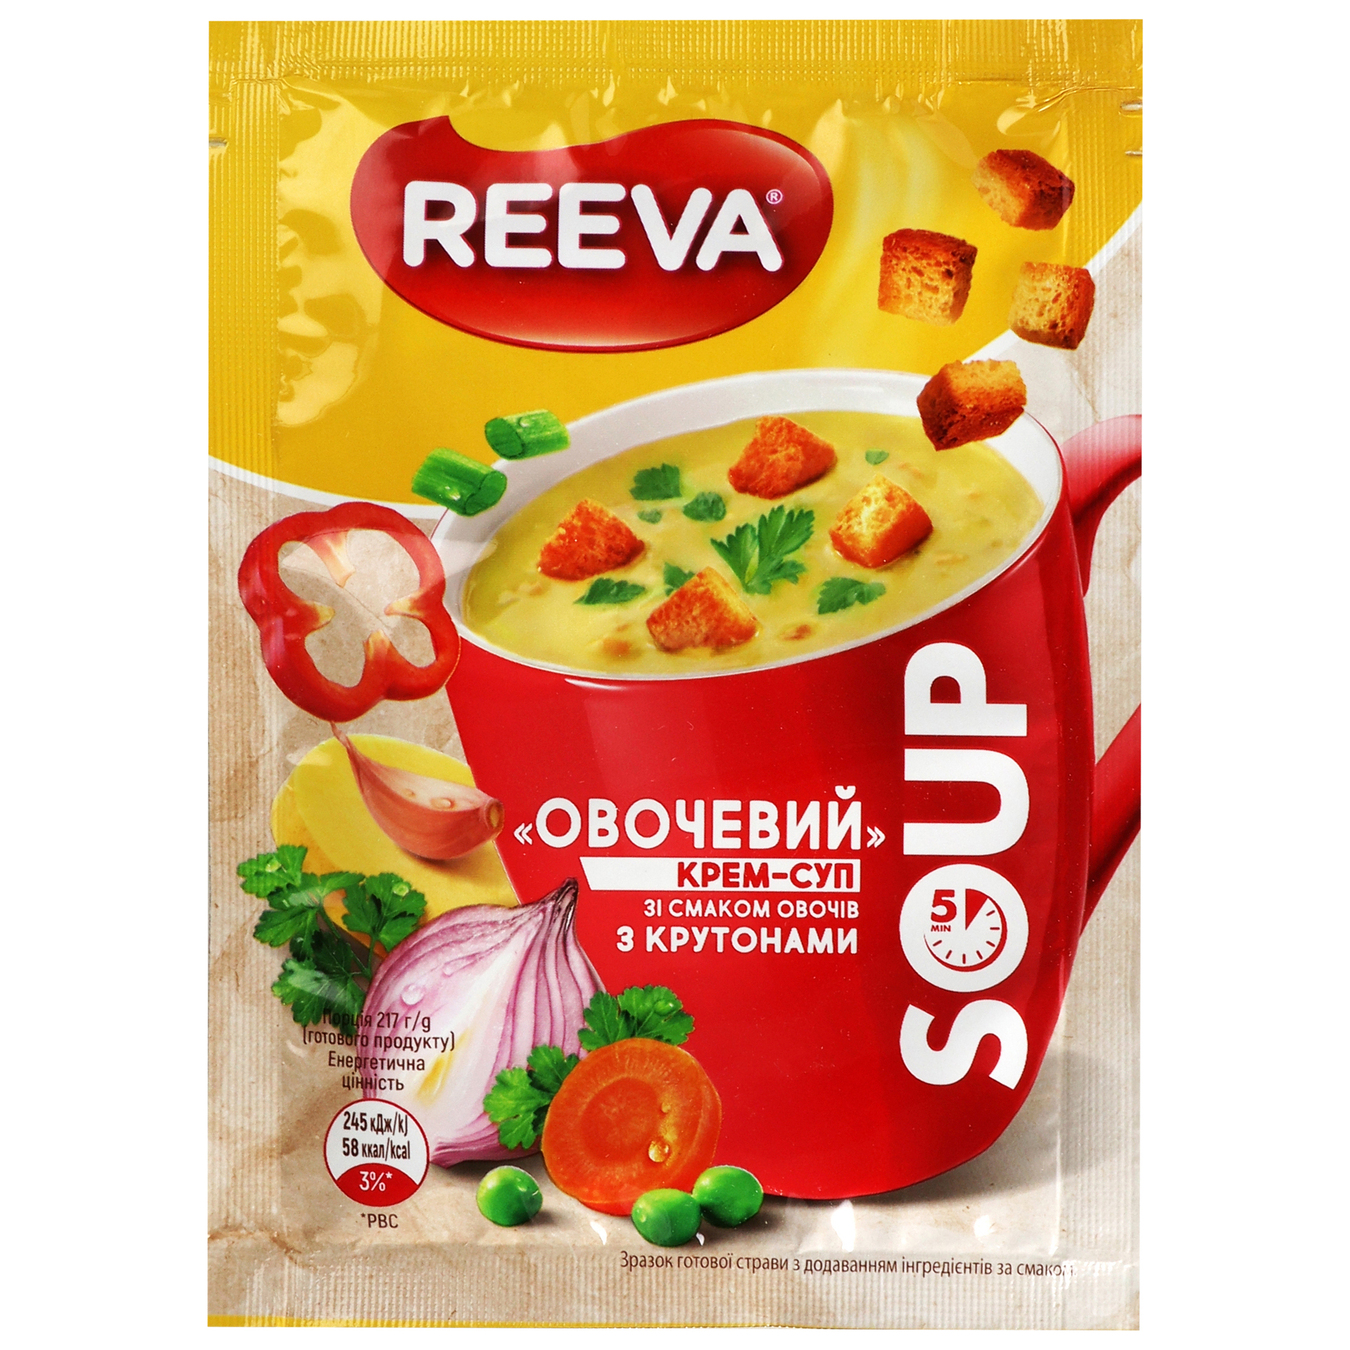 Reeva vegetable cream soup with croutons 17g